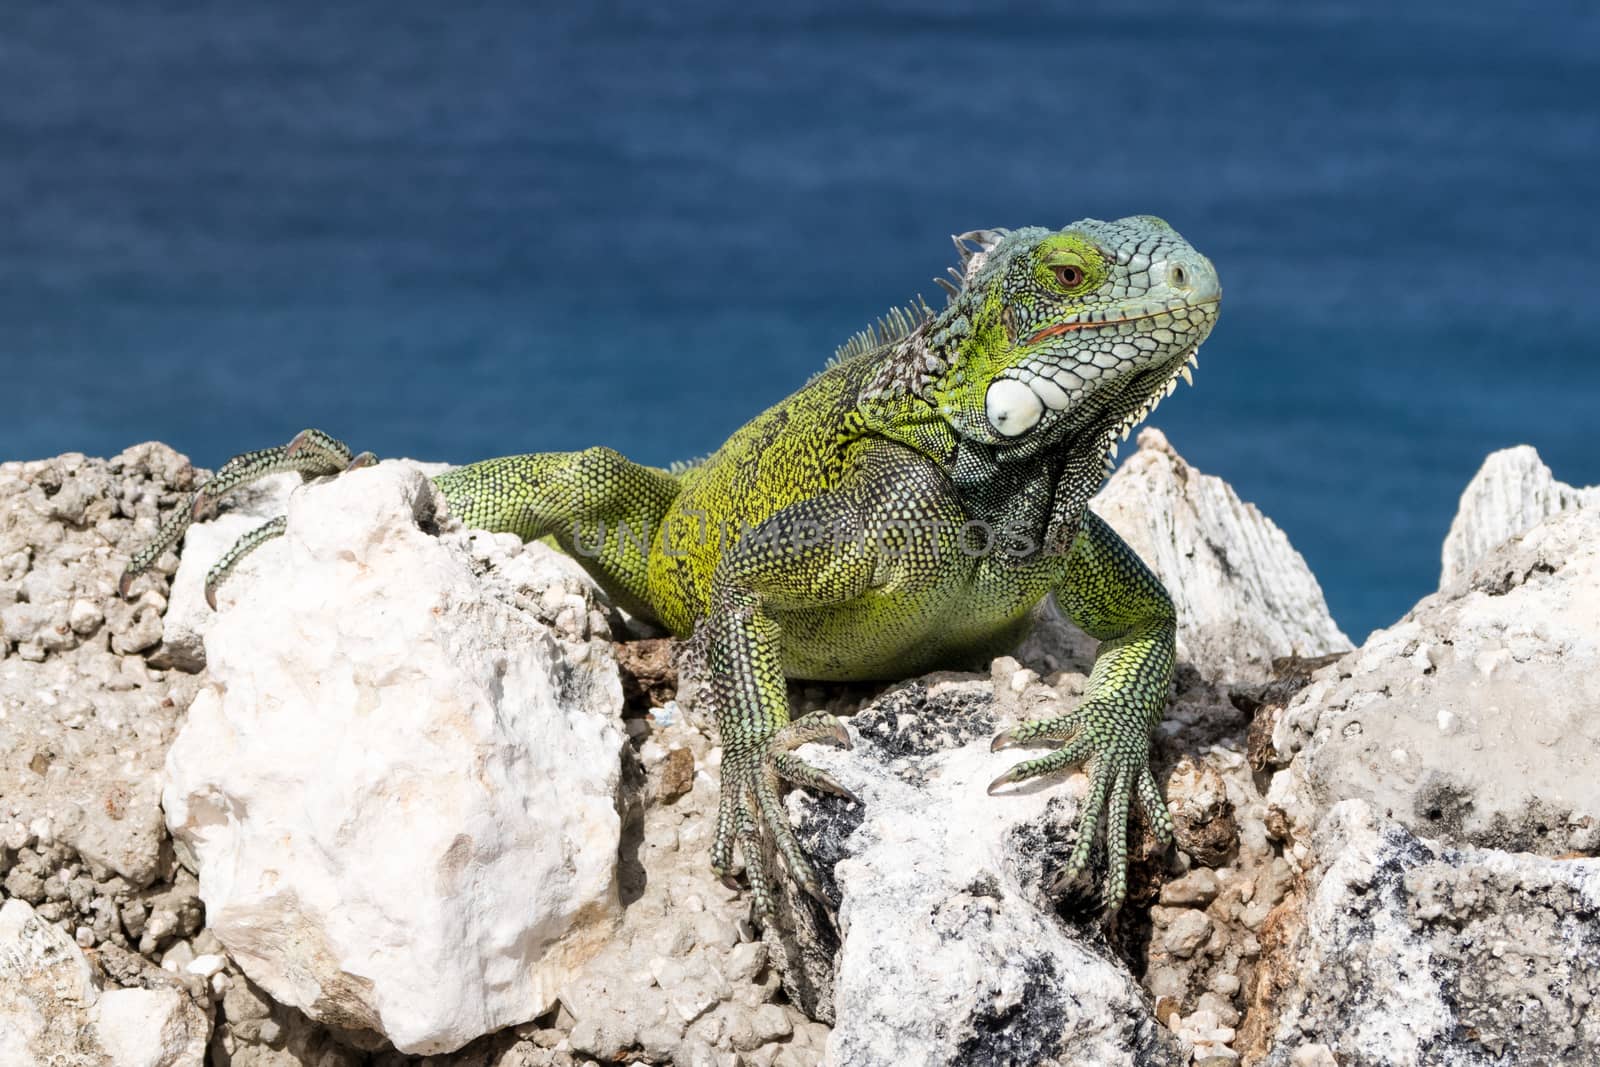 Green Iguana chilling on rocks on a cliff in Curacao.